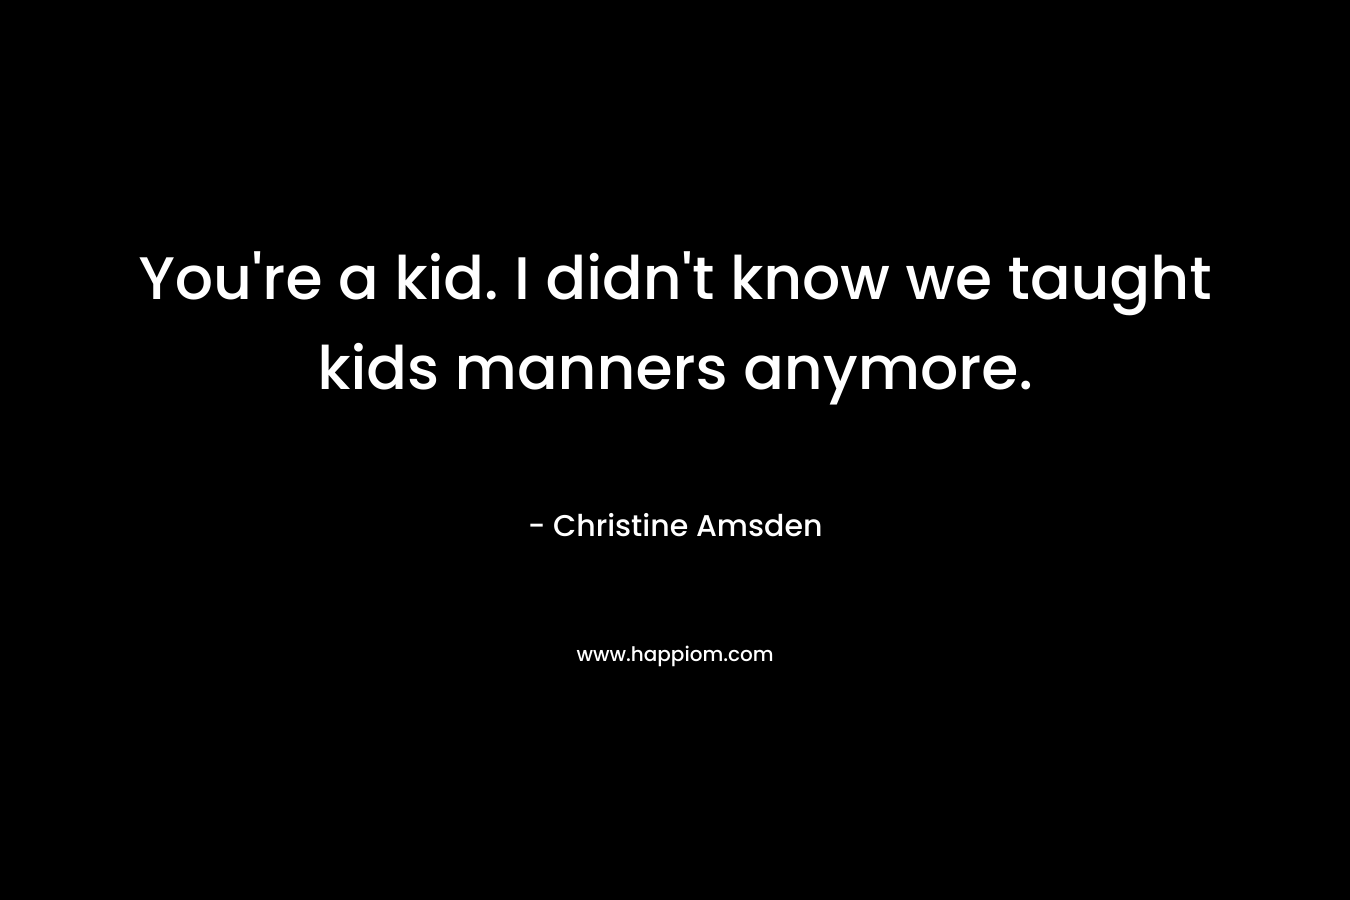 You’re a kid. I didn’t know we taught kids manners anymore. – Christine Amsden